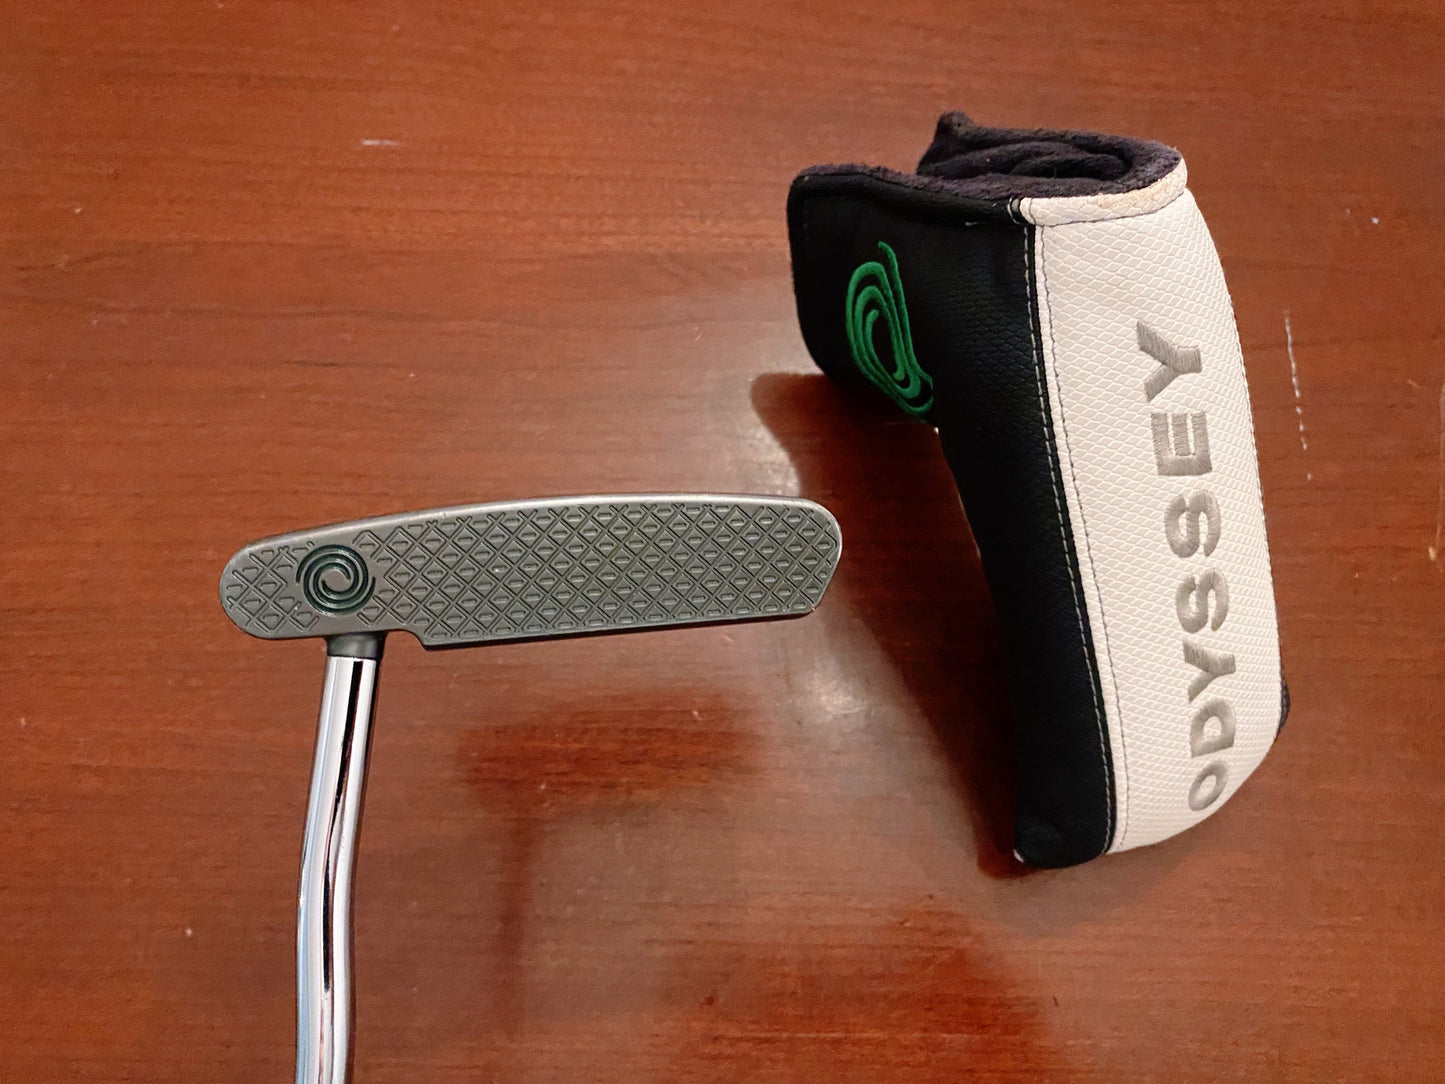 Odyssey Toulon Chicago Stroke Lab Putter + headcover